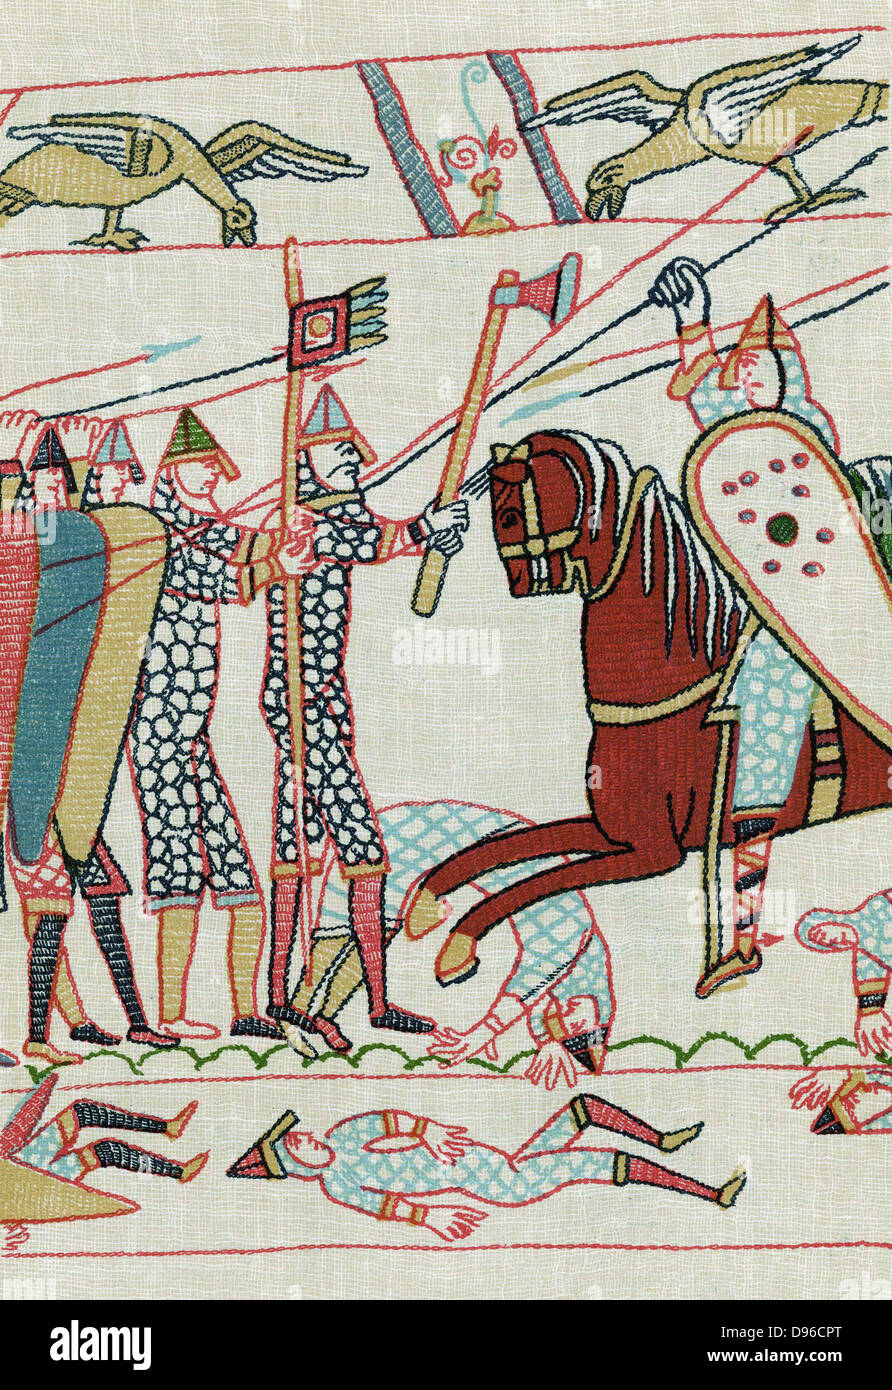 Harold II's (c1022-1066) Anglo-Saxon troops (left) led by armoured standard bearer and warrior with axe, confront Norman cavalryman armed with lance:1066. After a detail from the Bayeux Tapestry. Lithograph. Stock Photo